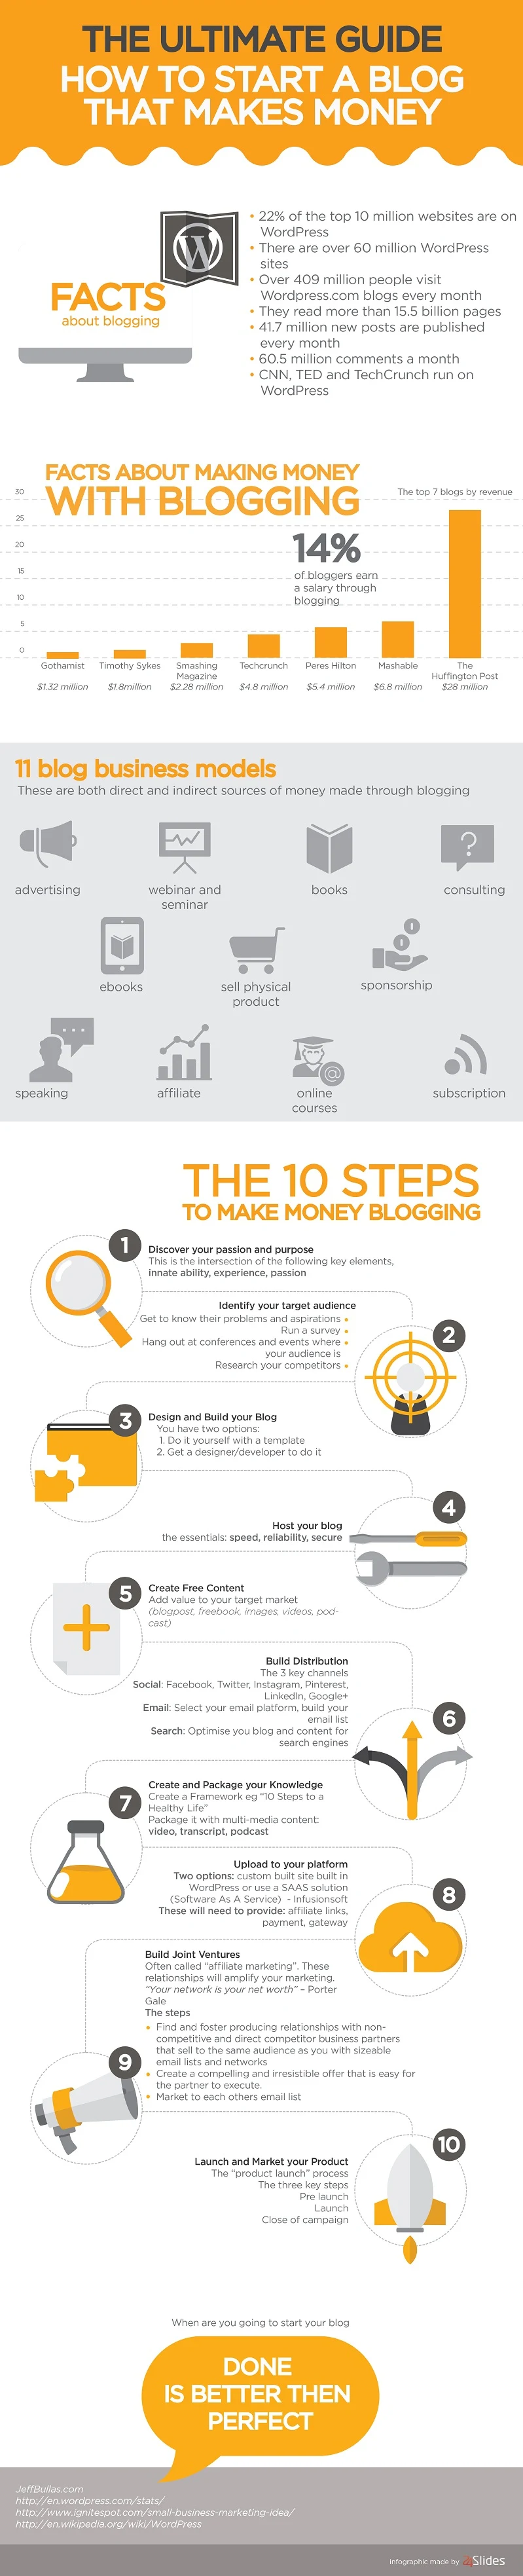 The Ultimate Guide – The 10 Key Steps on How To Start a Blog That Makes Money - #infographic